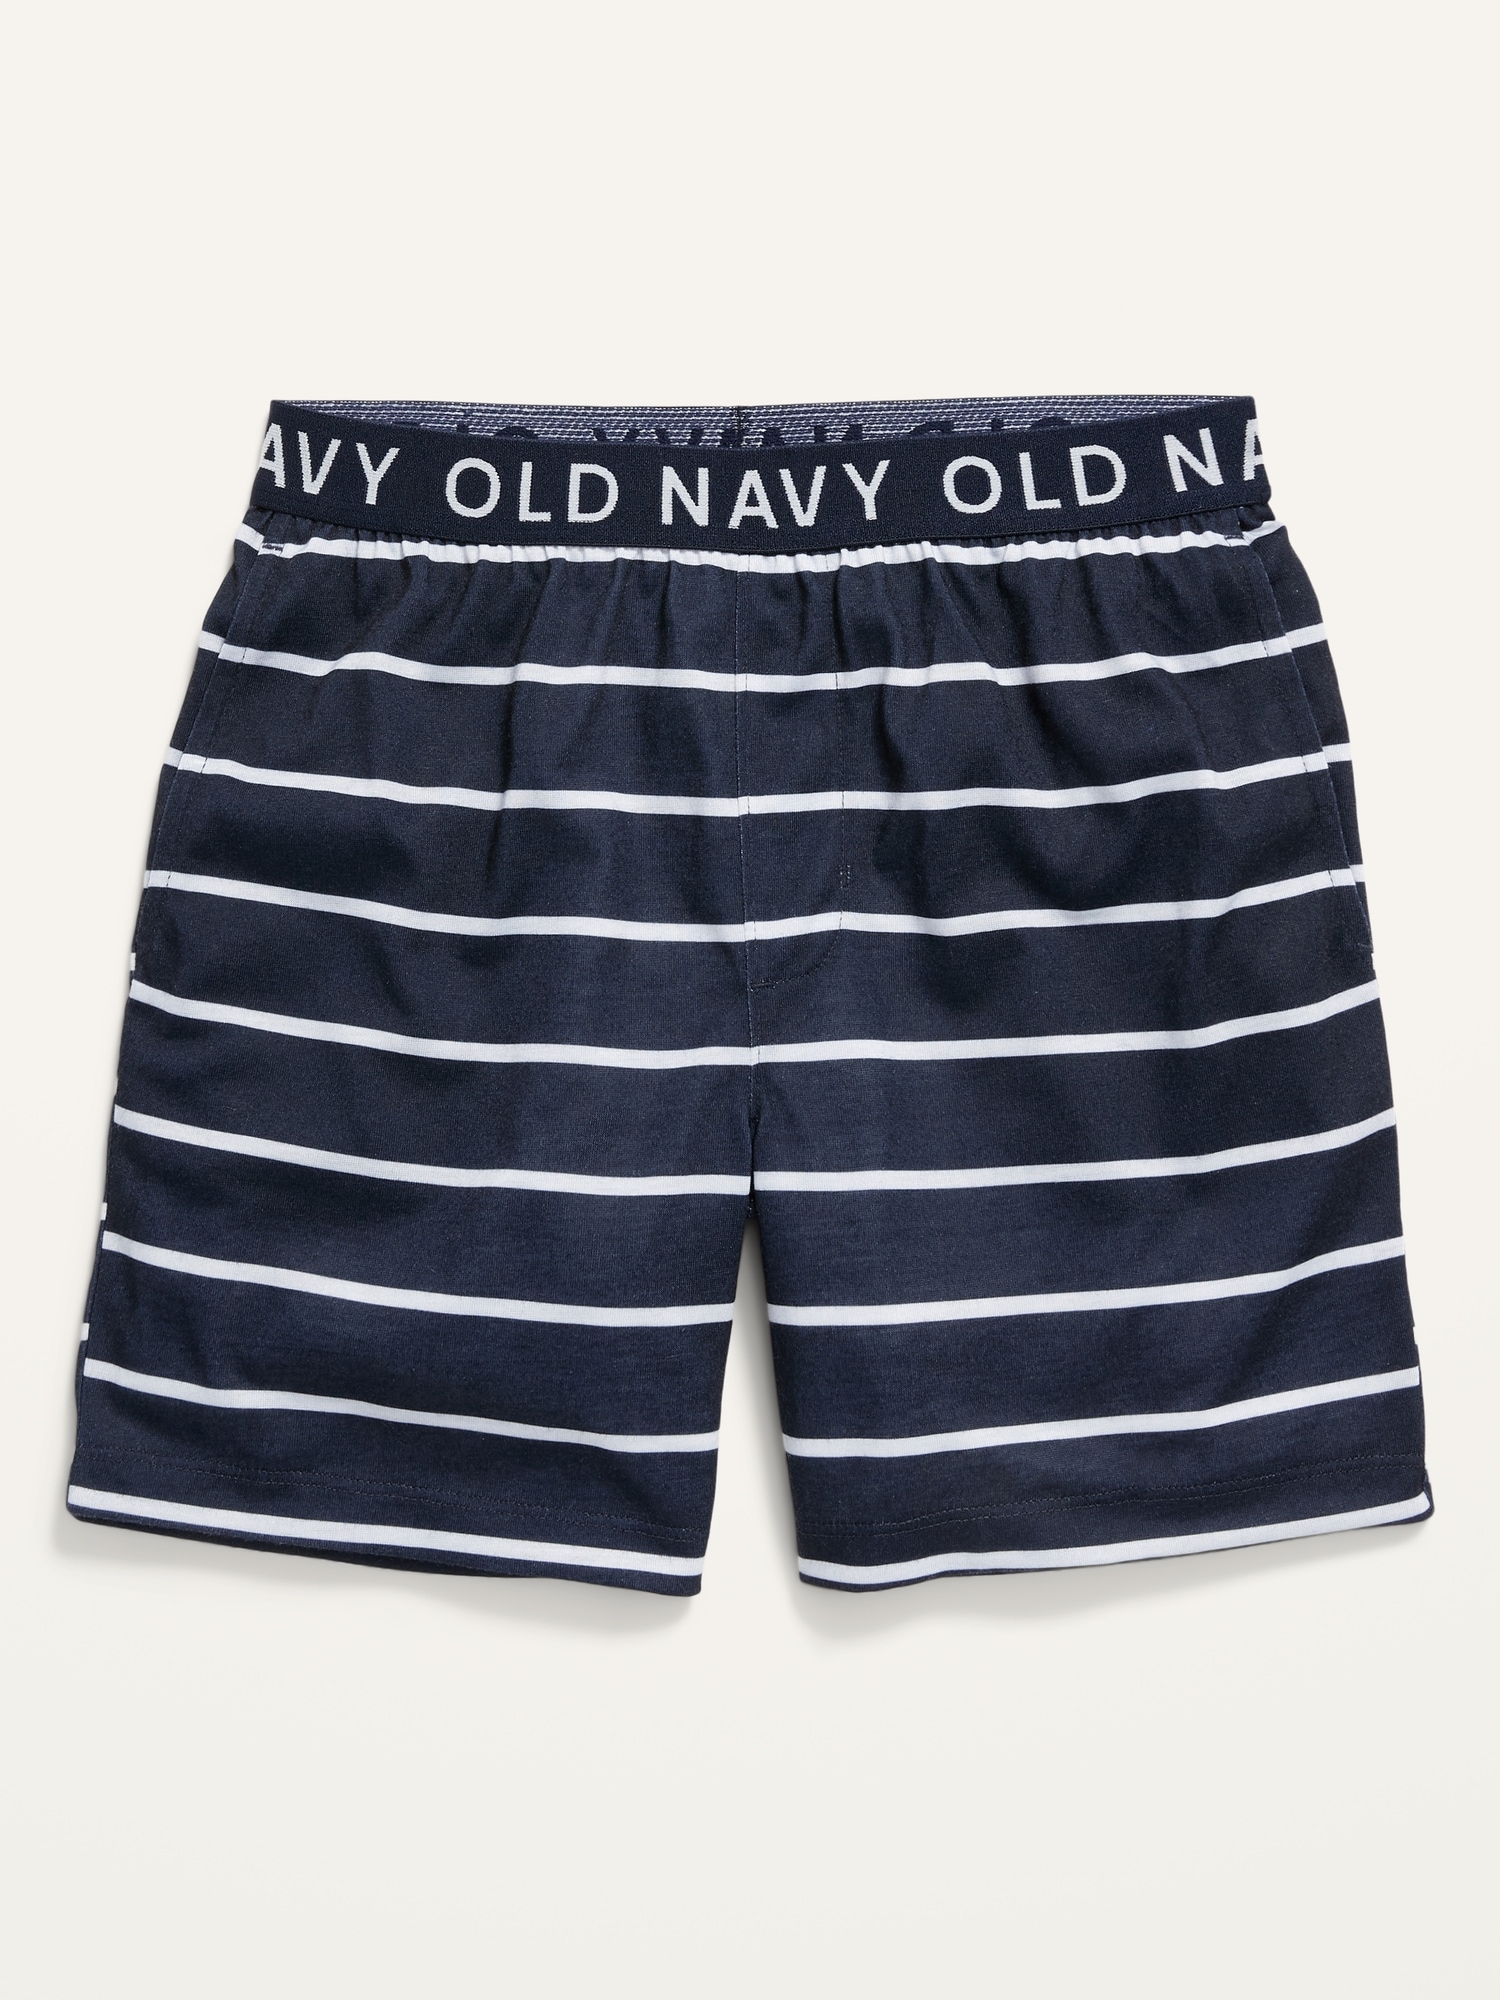 Exposed-Elastic Printed Pajama Shorts for Boys | Old Navy